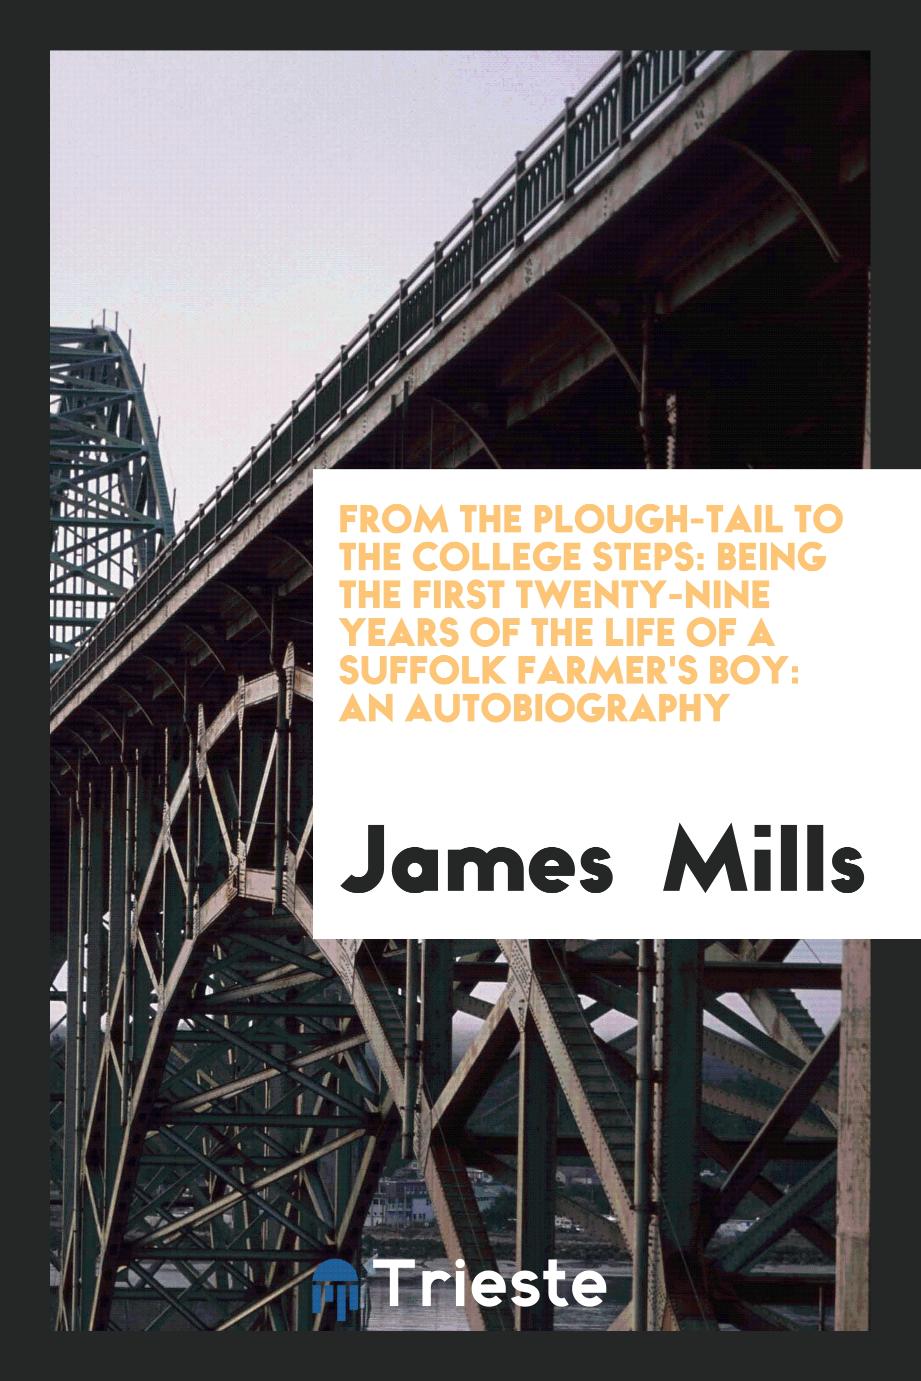 From the Plough-Tail to the College Steps: Being the First Twenty-Nine Years of the Life of a Suffolk Farmer's Boy: An Autobiography